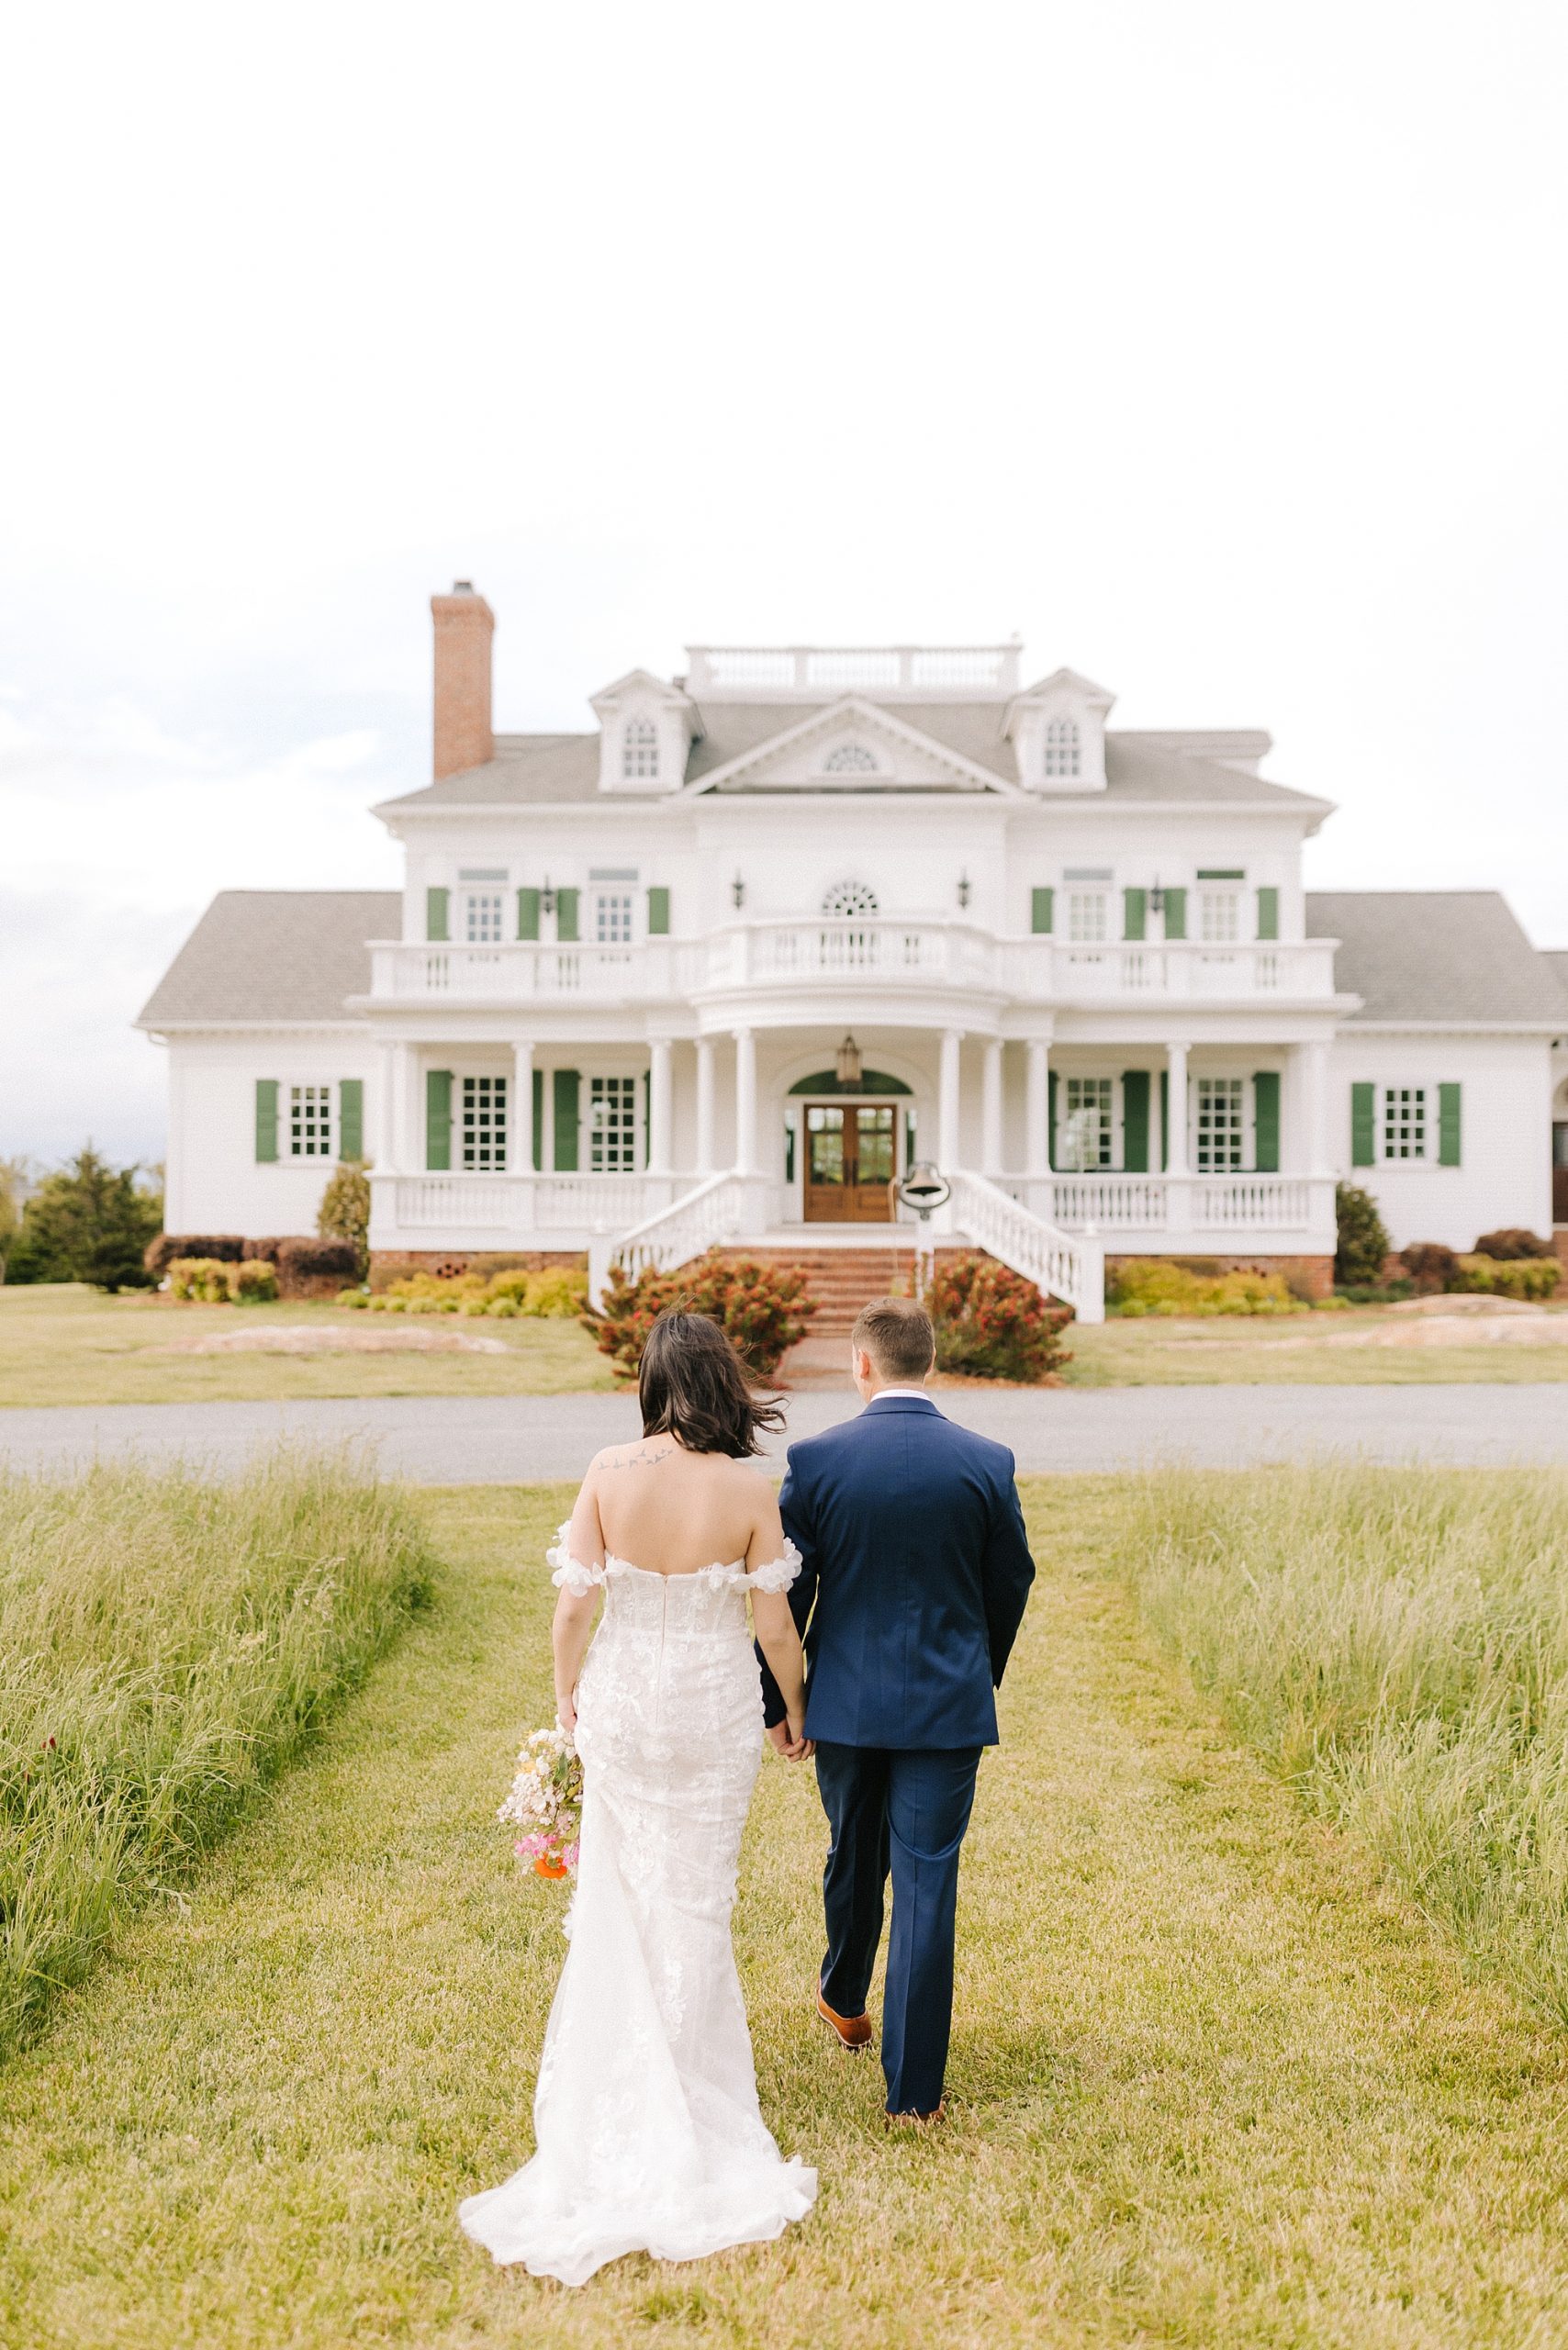 Moore's Spring Manor elopement for bride and groom